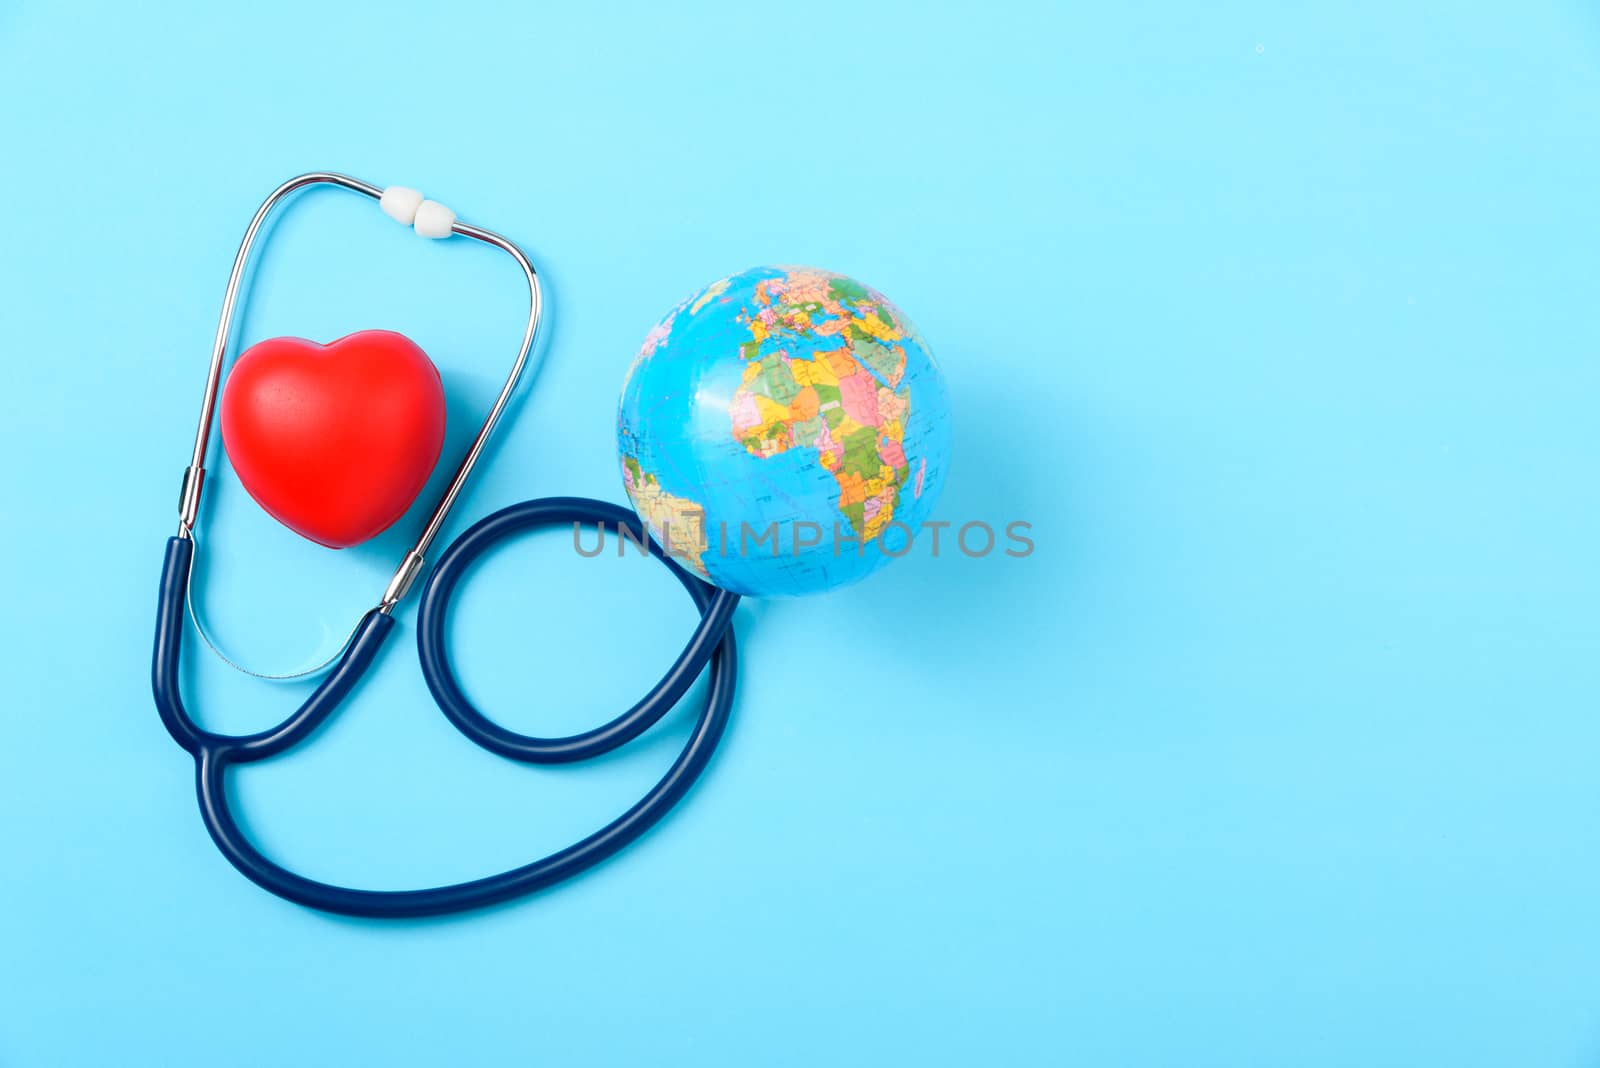 World health day concept, Stethoscope, globe and red heart on blue background with copy space. Global health care